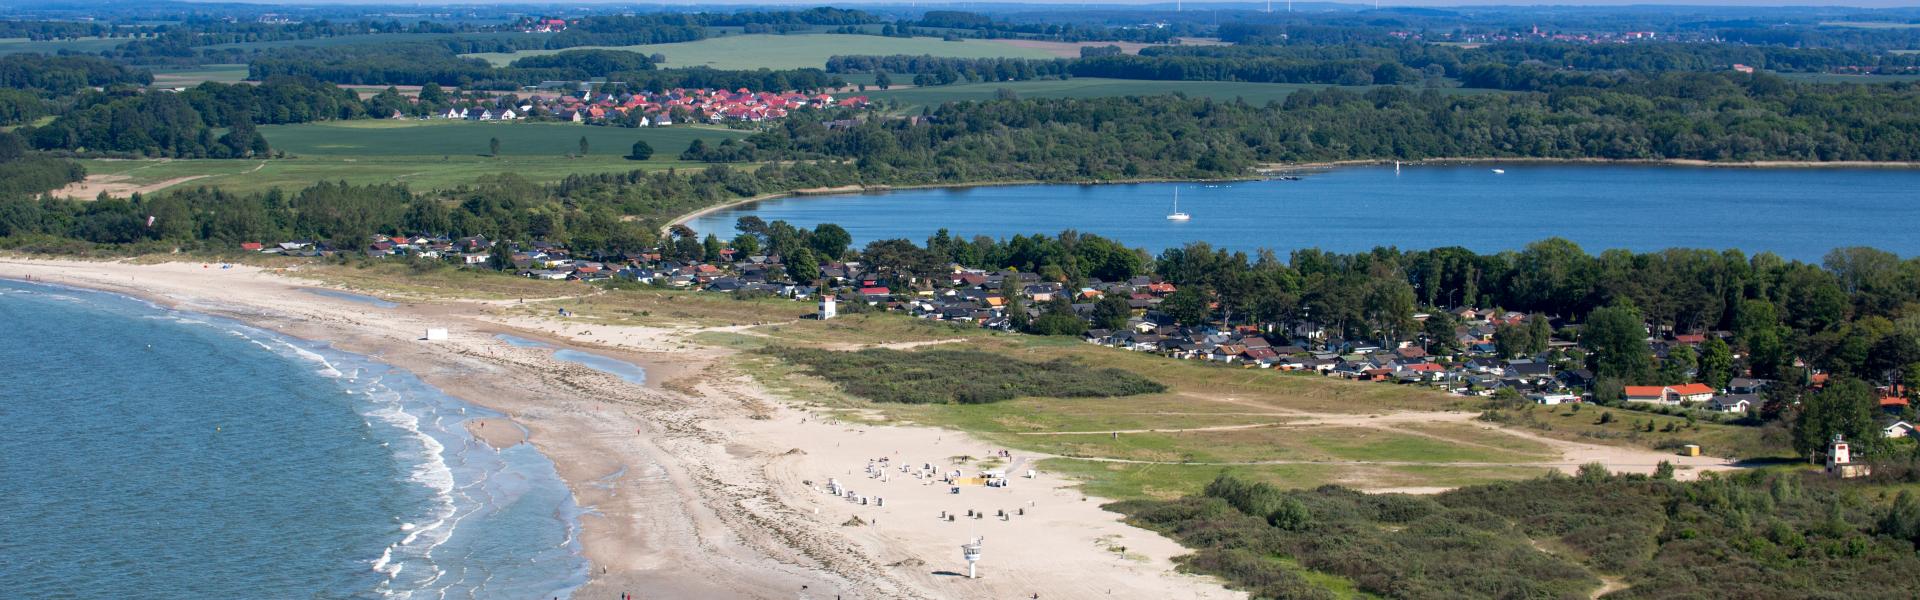 Overhead of Priwall beach and Luebecker Bucht of Baltic Sea, Travemuende, Schleswig-Holstein, Germany.